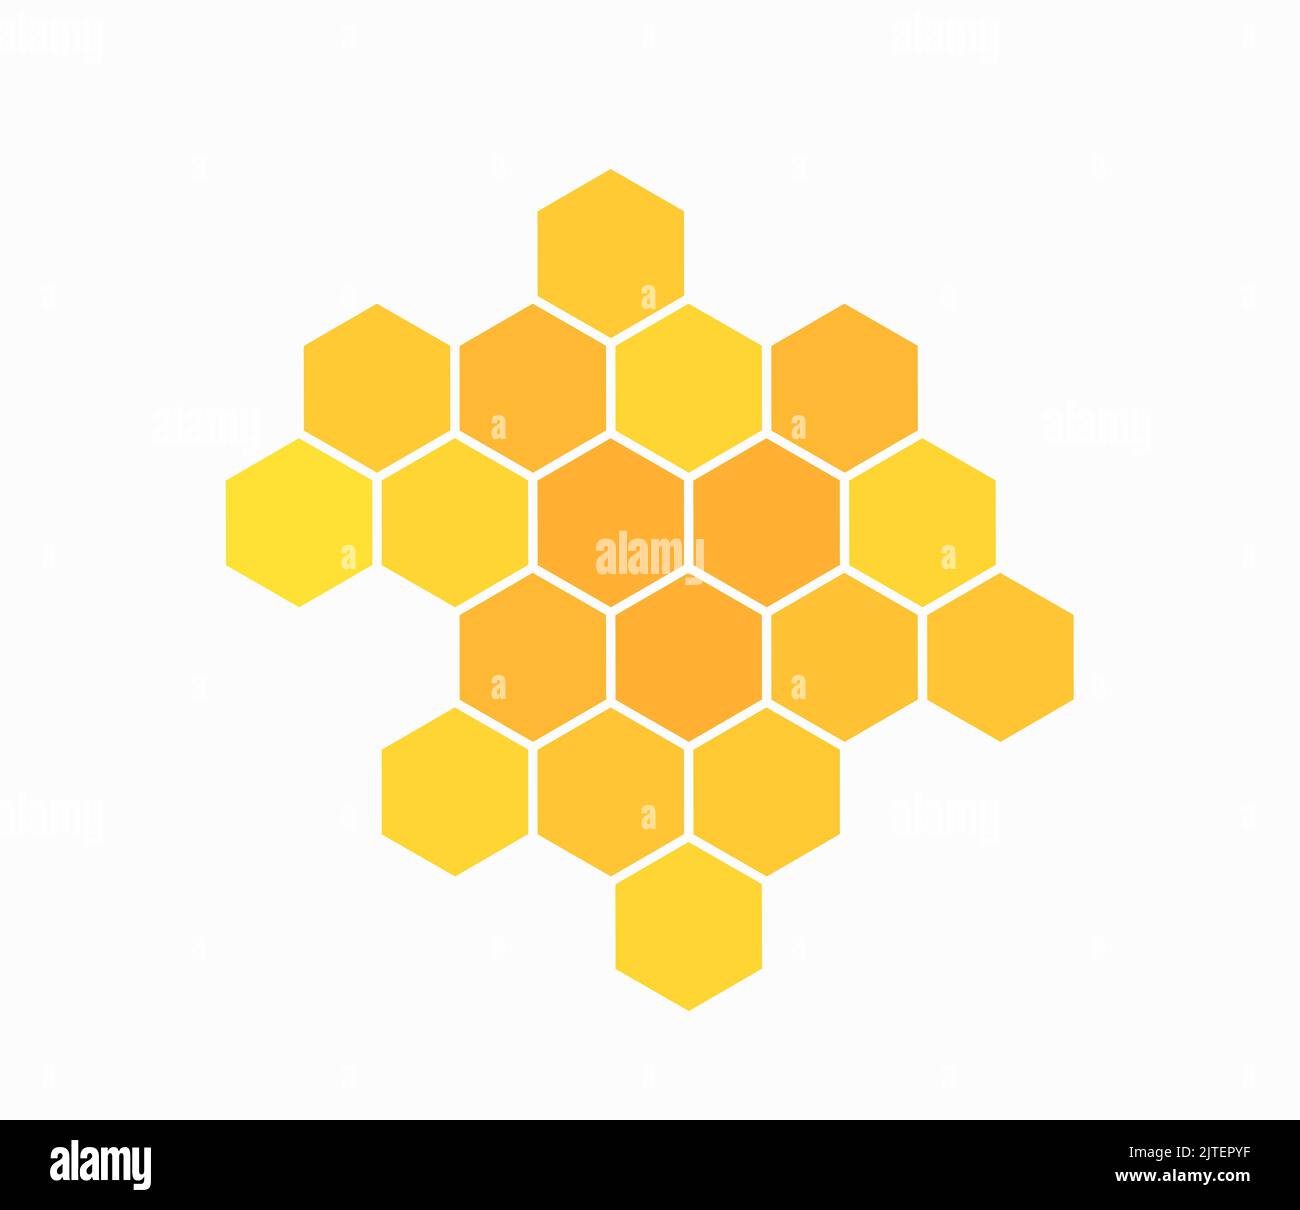 Honeycomb symbol isolated on white background. Vector illustration. Stock Vector